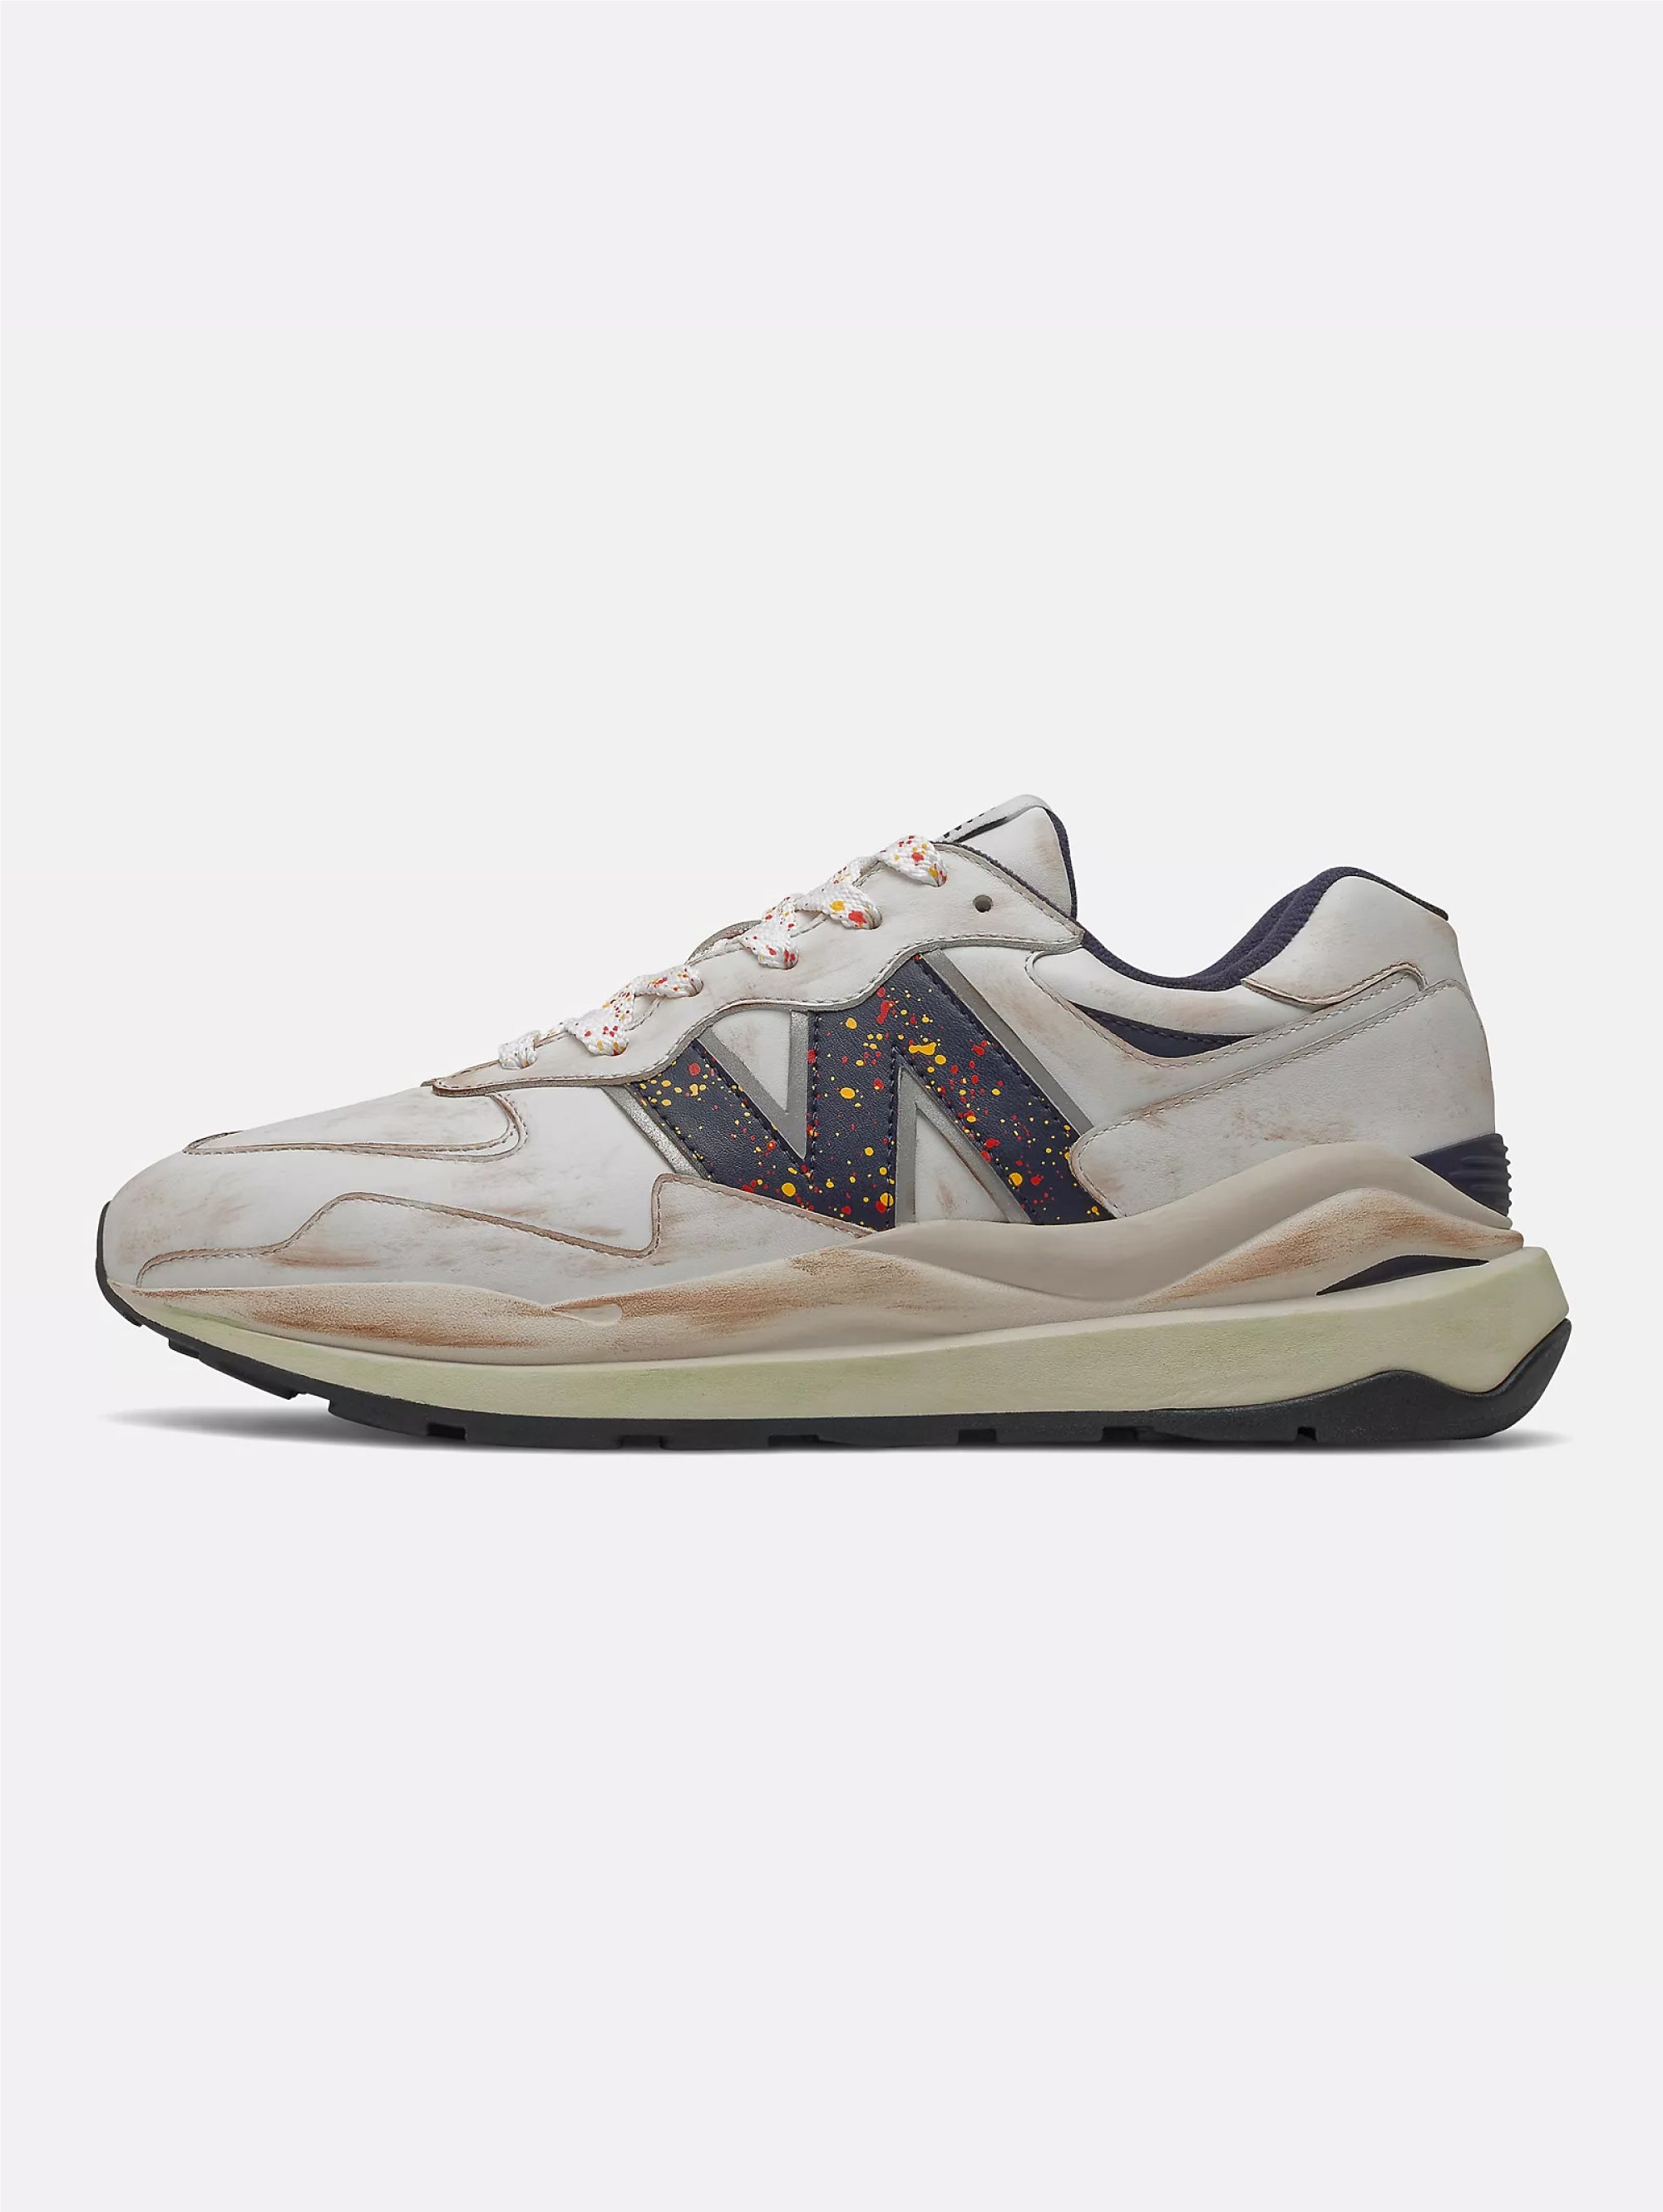 NEW BALANCE-Sneakers Lifestyle con Schizzi Bianco-TRYME Shop